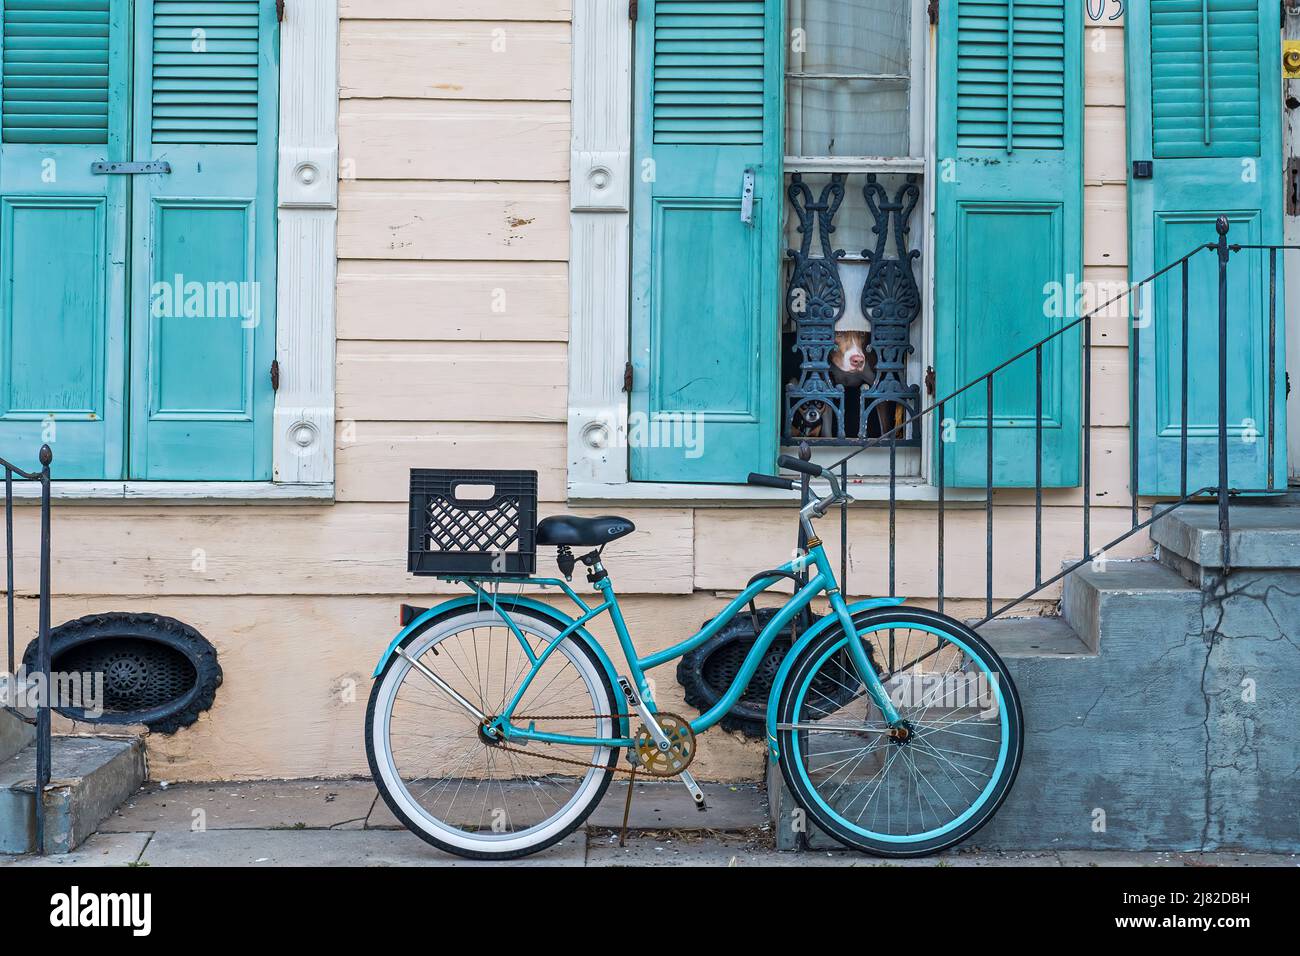 NEW ORLEANS, LA - JULY 30, 2020: Blue bicycle, blue shutters and dog in the window of shotgun home in the French Quarter Stock Photo